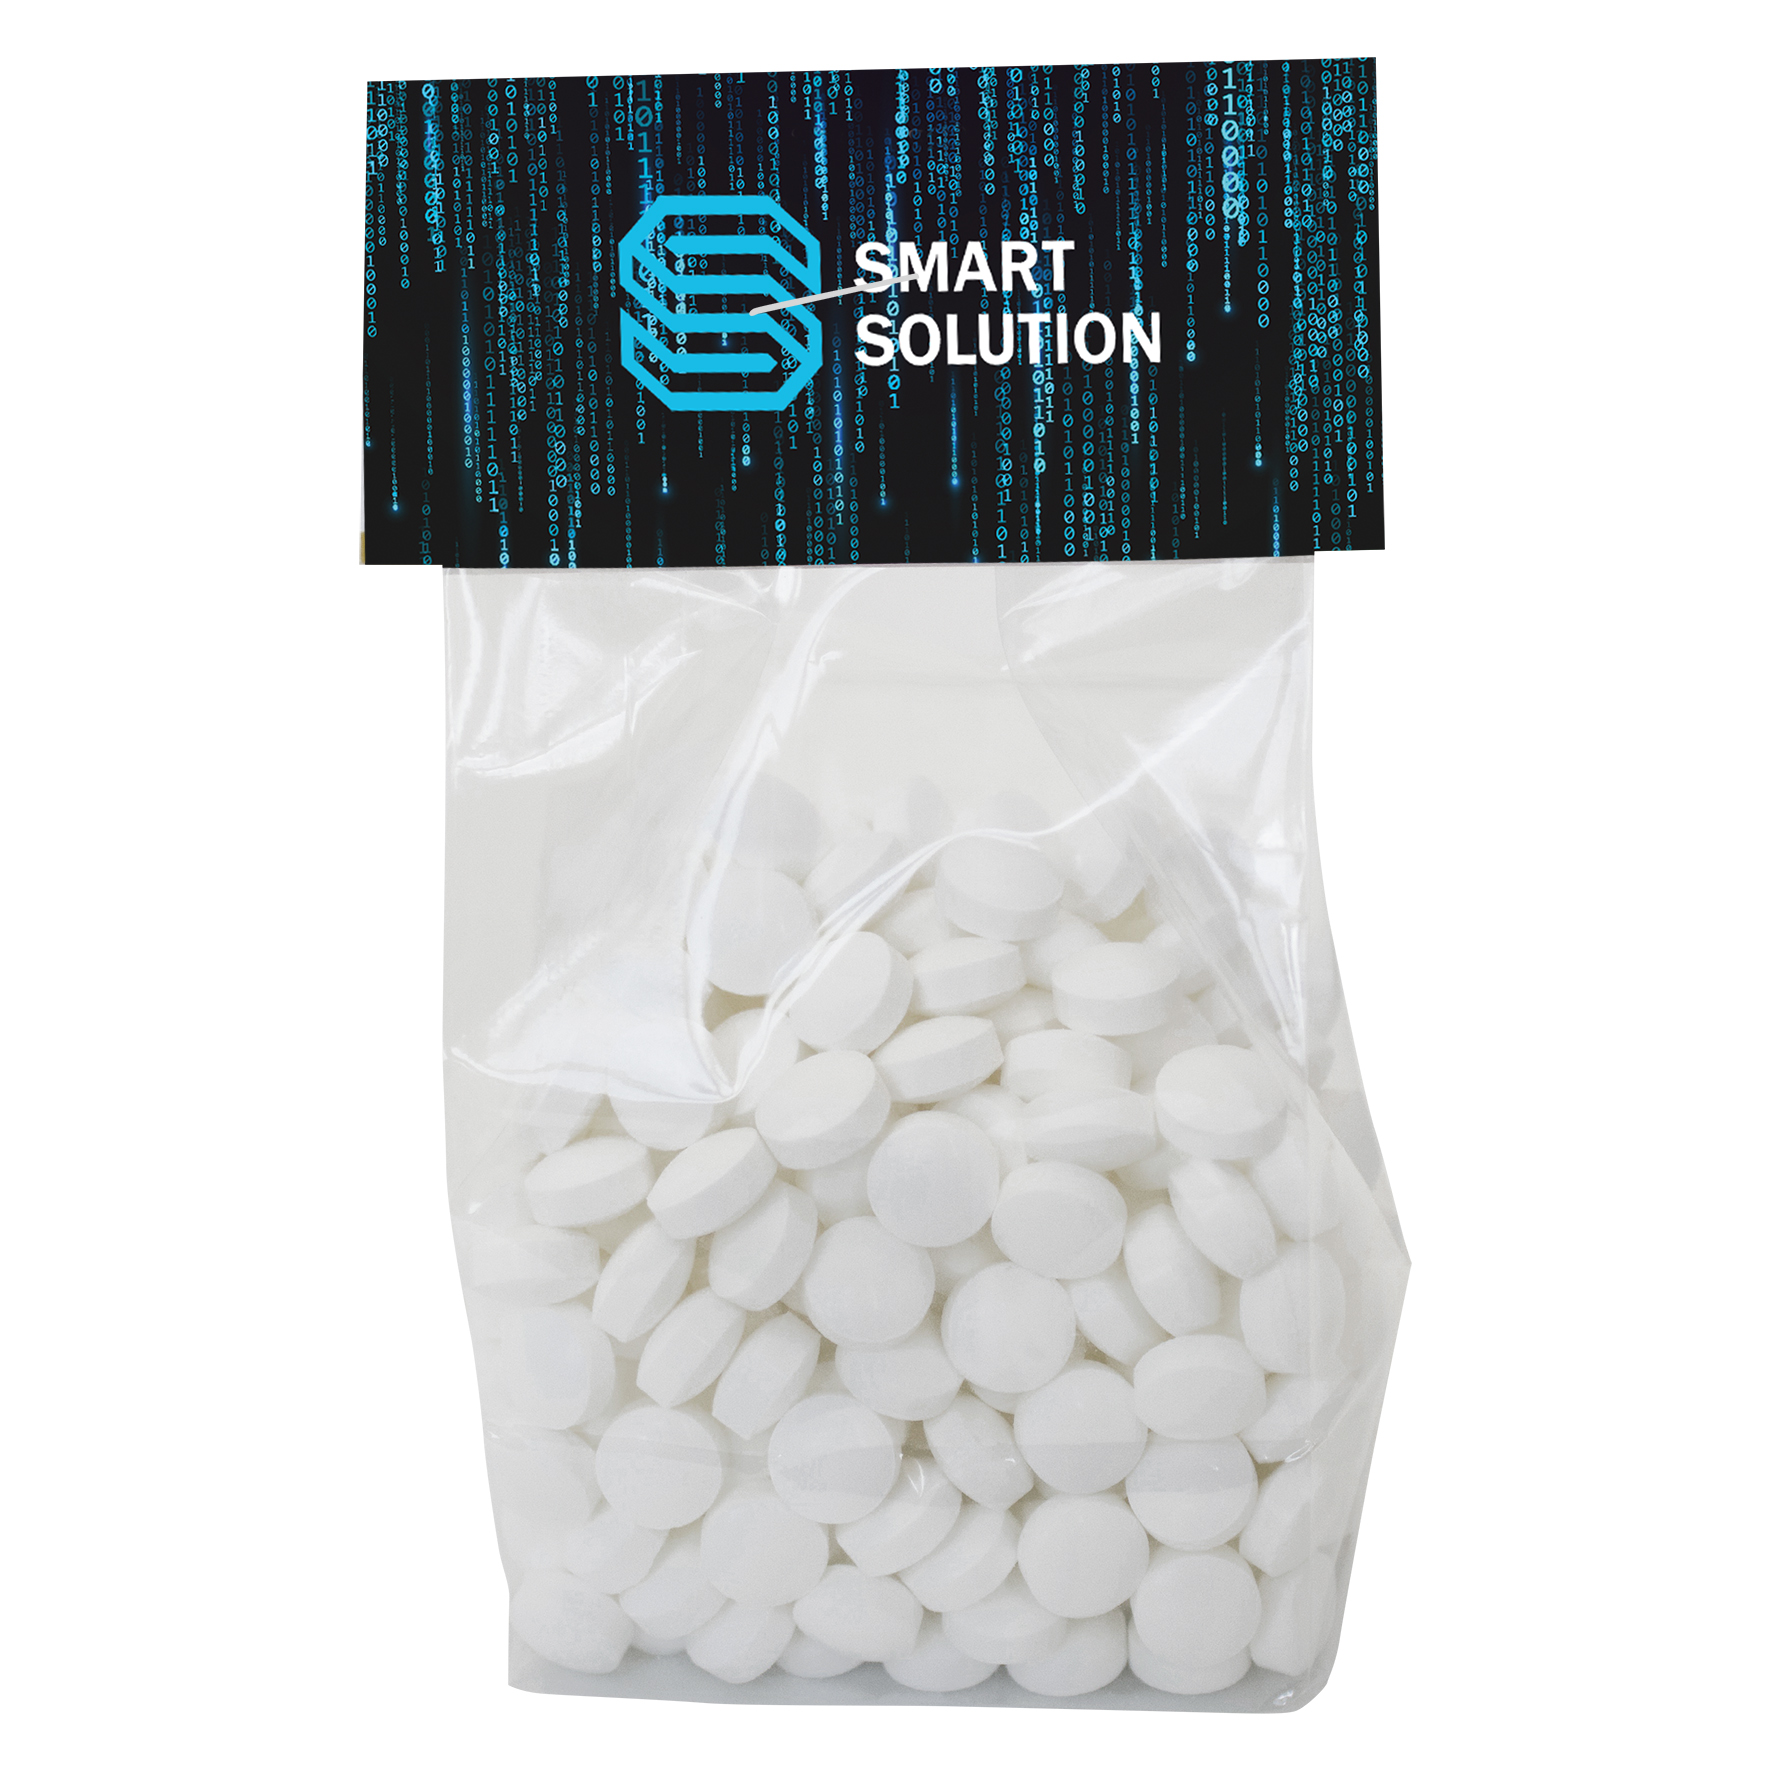 c 0630dmi 00 02 - 150gr Bag with a card base and printed header board filled with extra strong mints